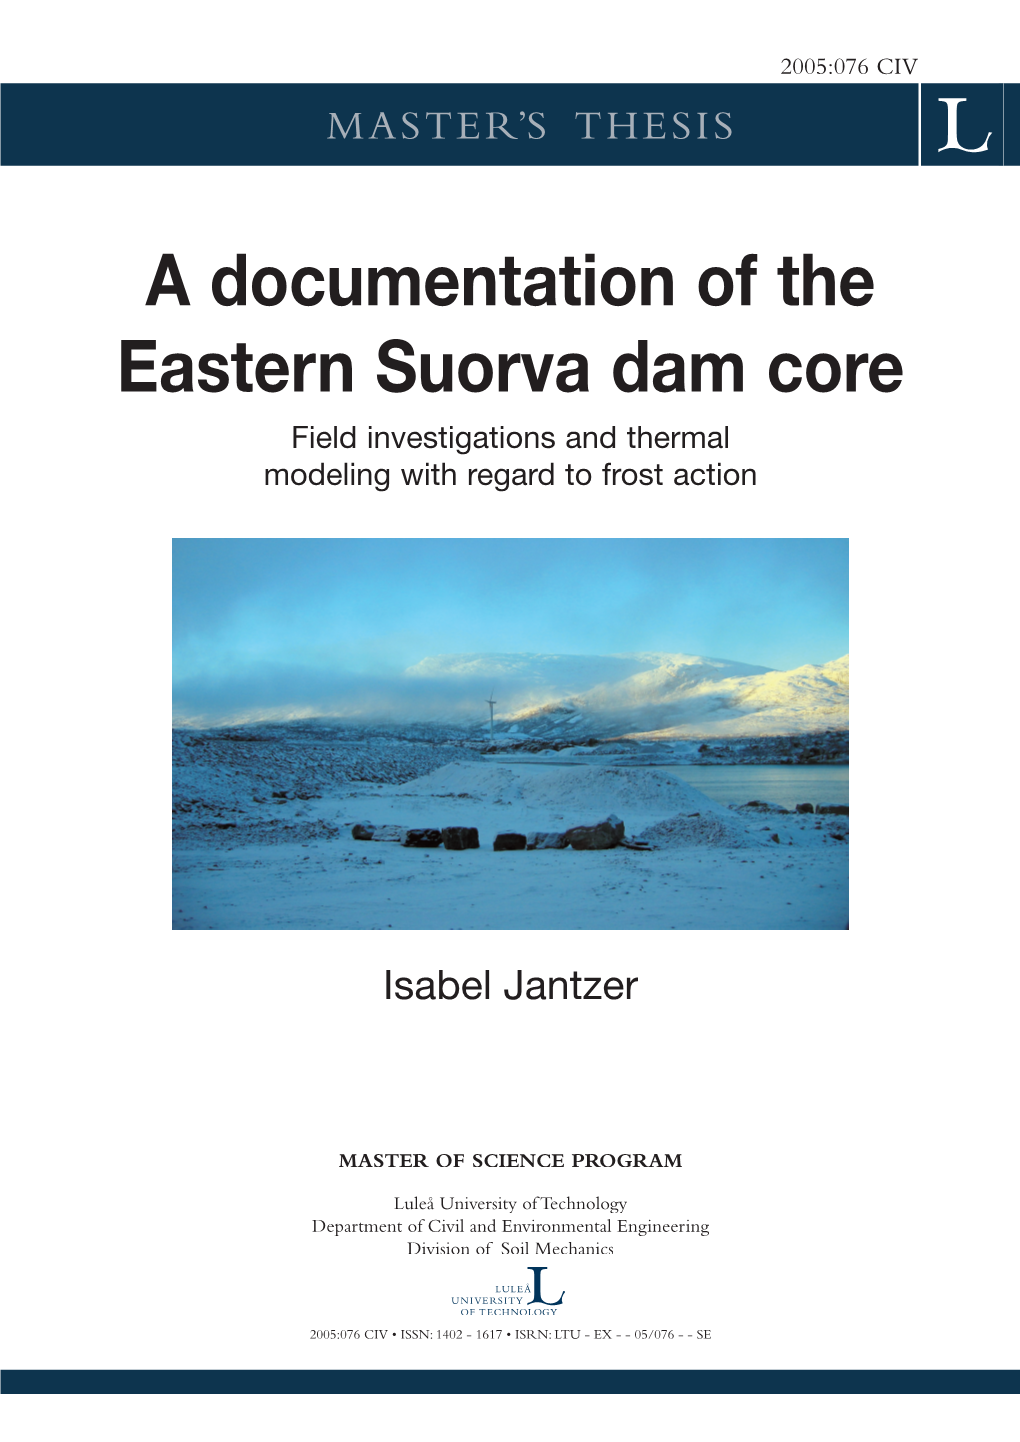 A Documentation of the Eastern Suorva Dam Core Field Investigations and Thermal Modeling with Regard to Frost Action